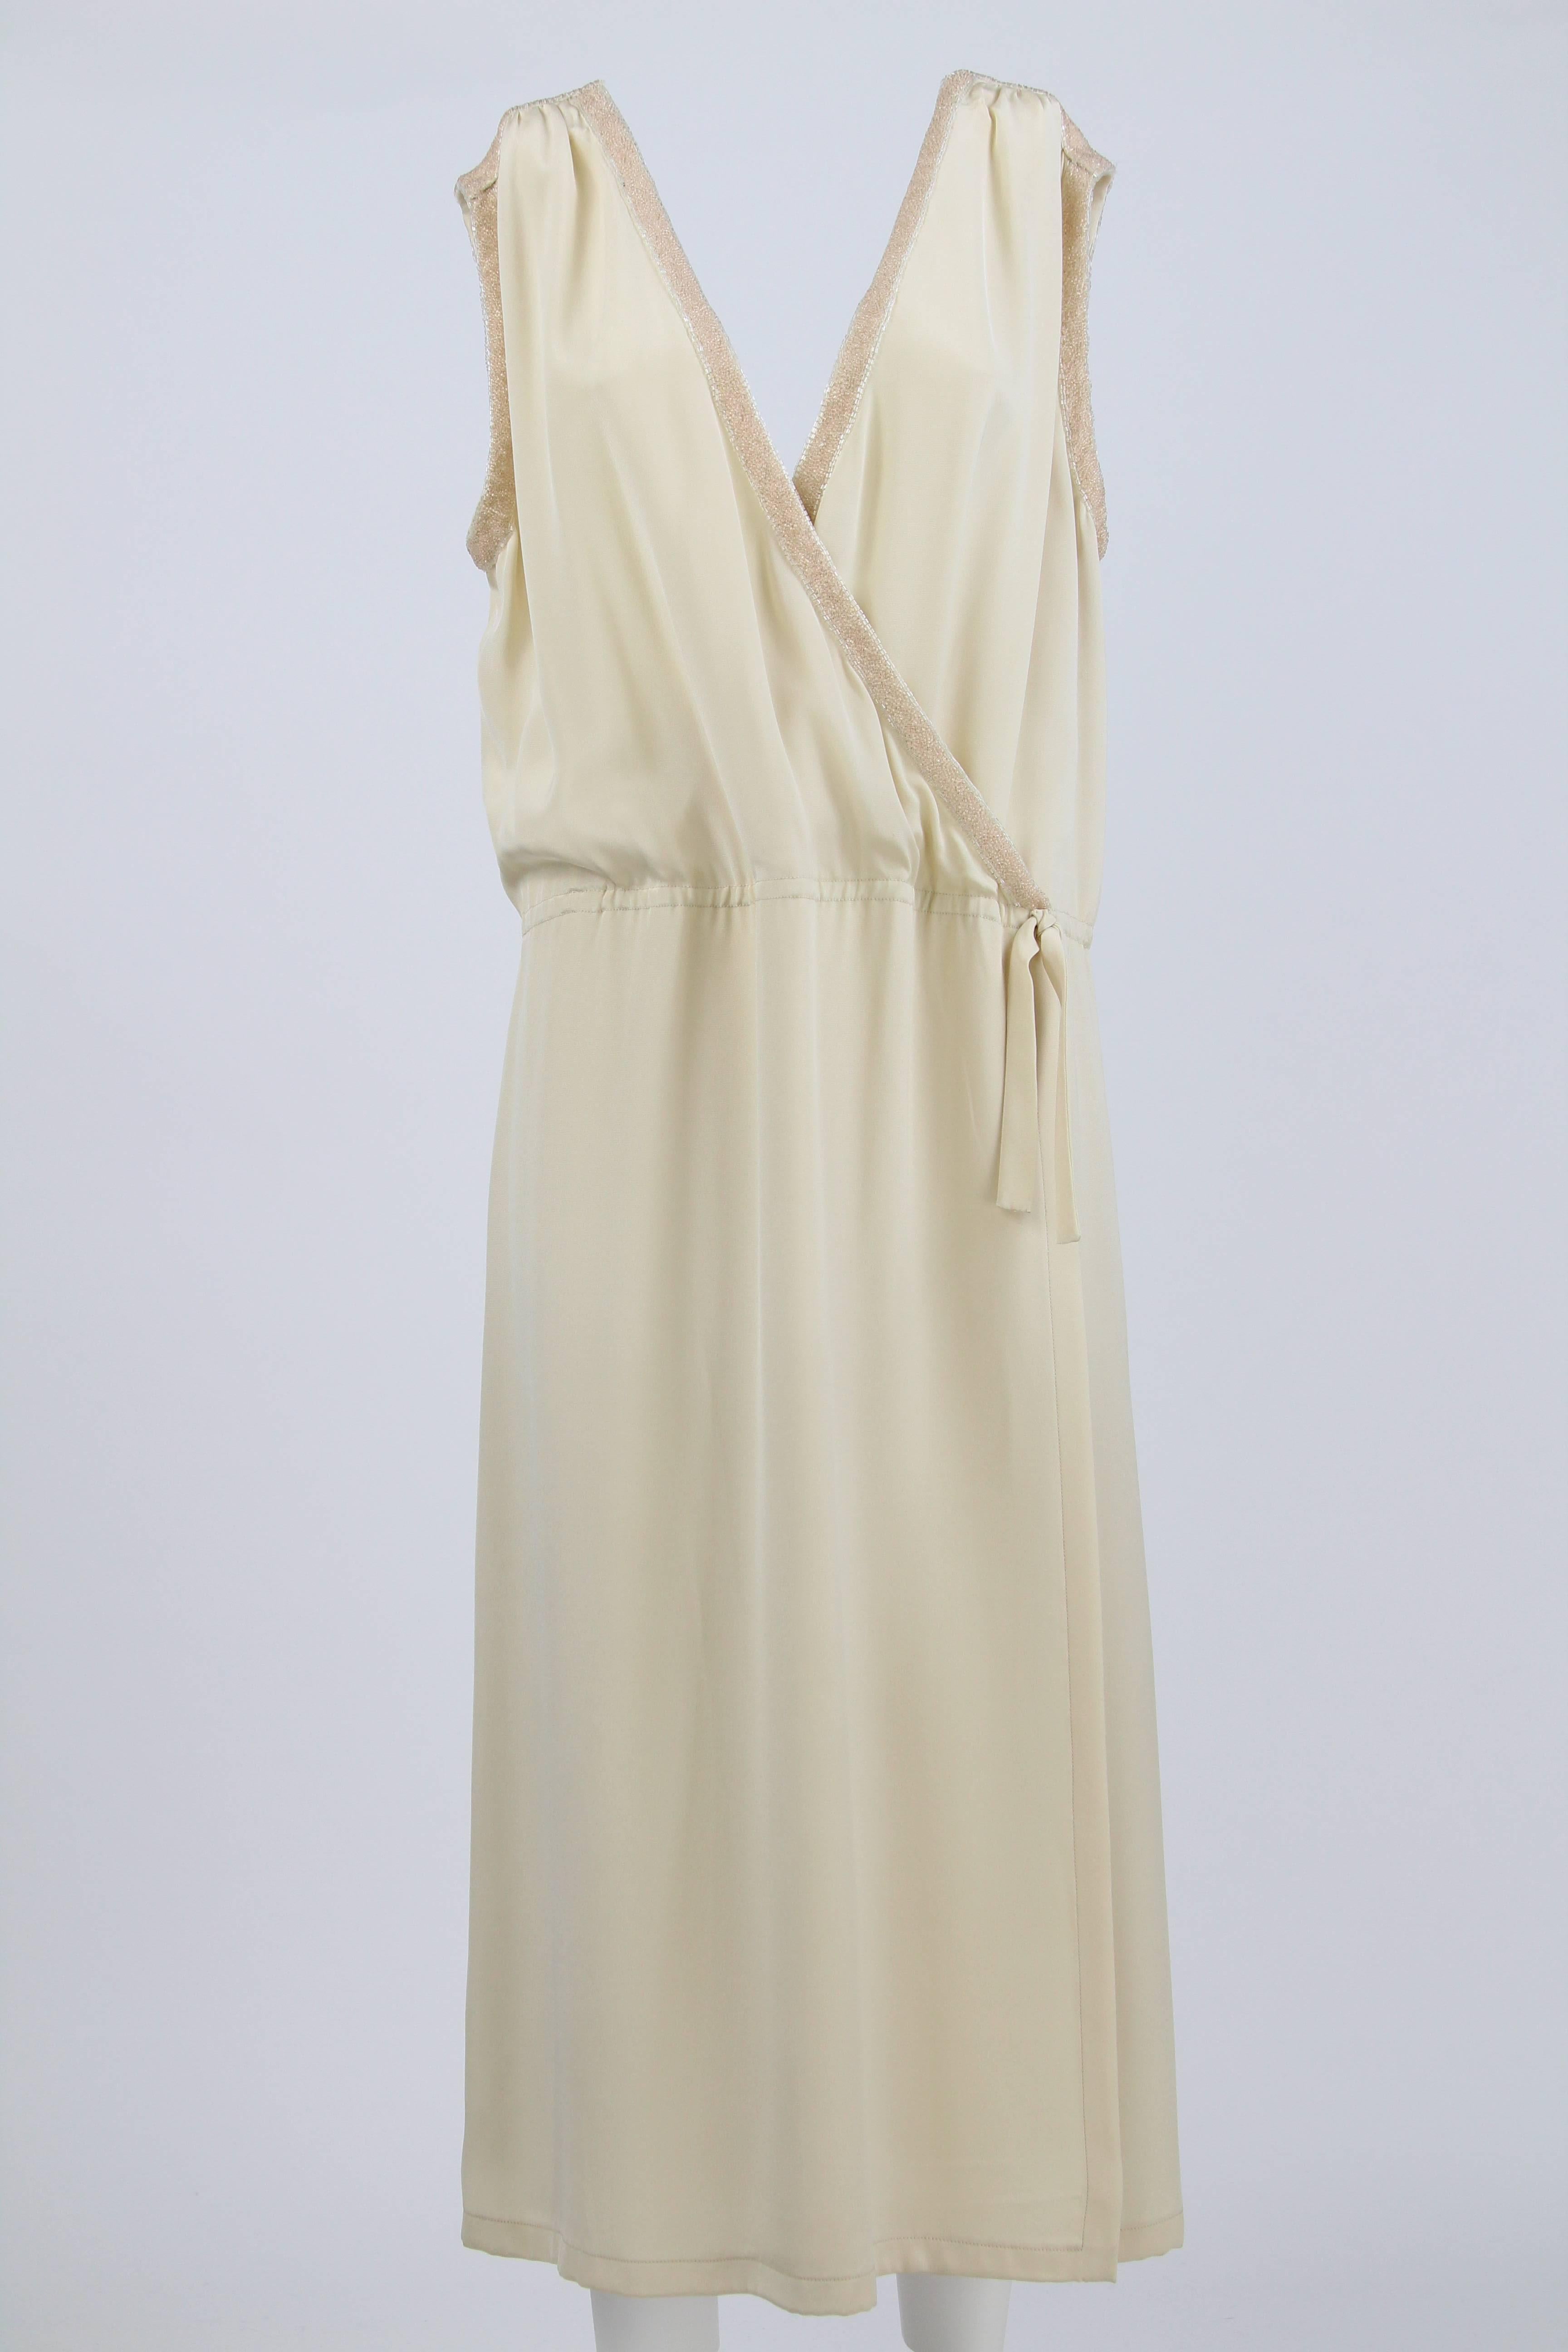 A.N.G.E.L.O. VINTAGE - Italy

Off-white color silk dress, handmade in Italy, featuring sequins embroiderd details and a oversized style.

Made in Italy

Size: L

Flat measurements 
Height: 122 cm 
Bust: 58 cm 

Composition: 100% Silk
Very good